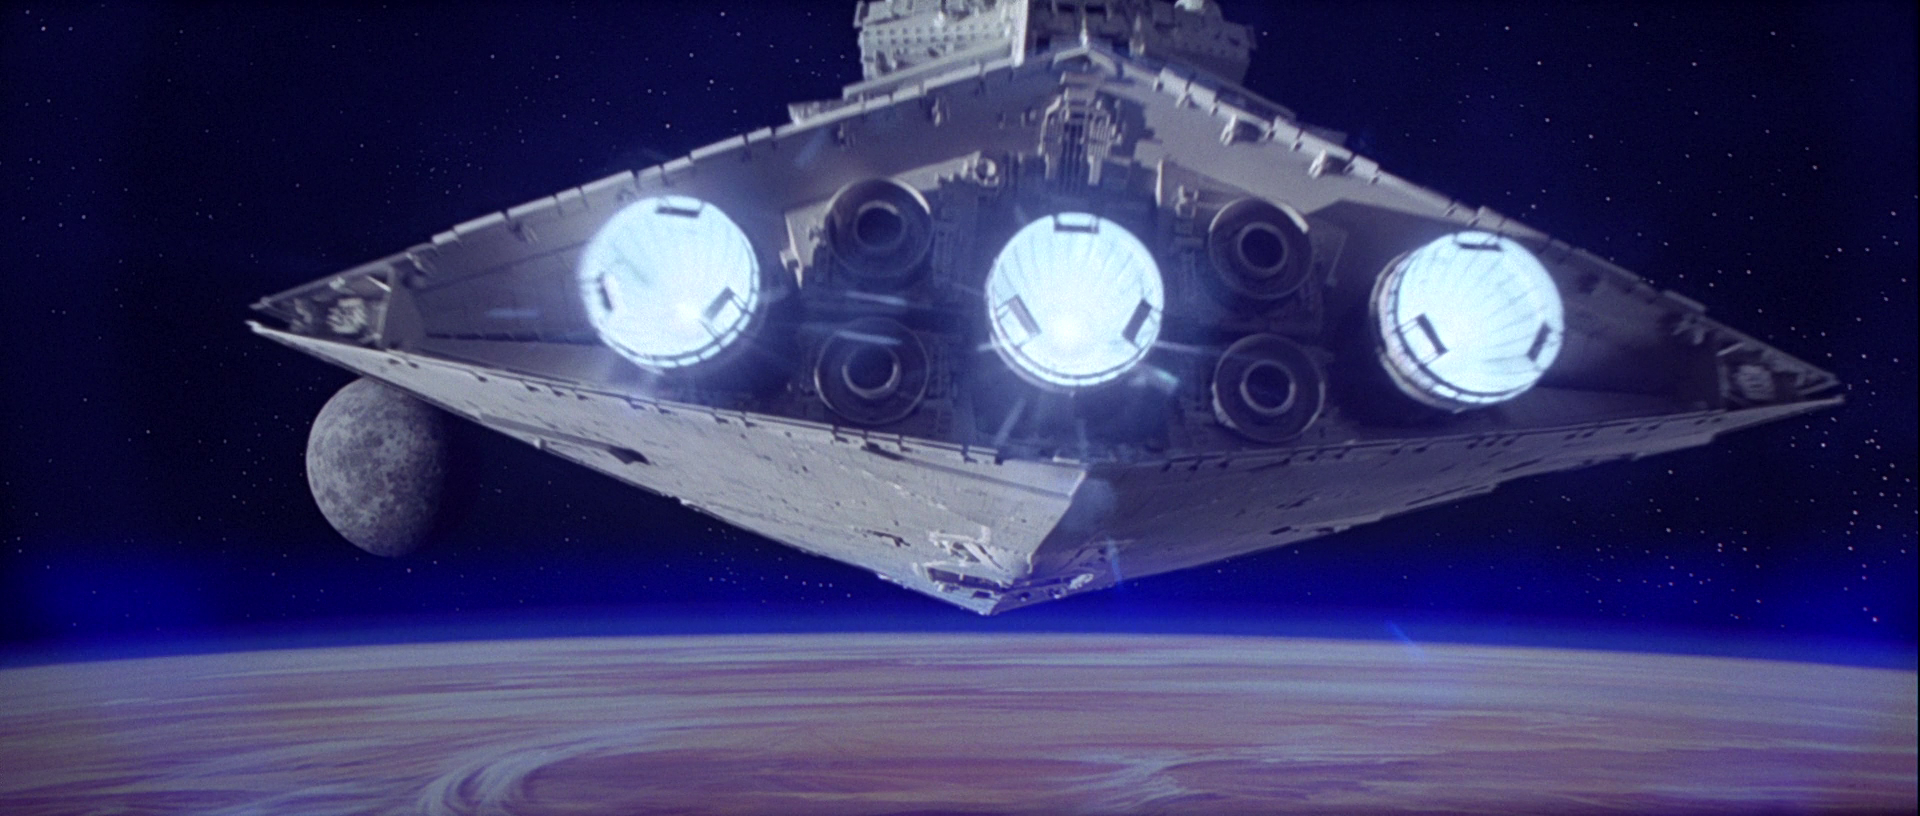 Star Destroyer Star Wars A New Hope Opening Scene